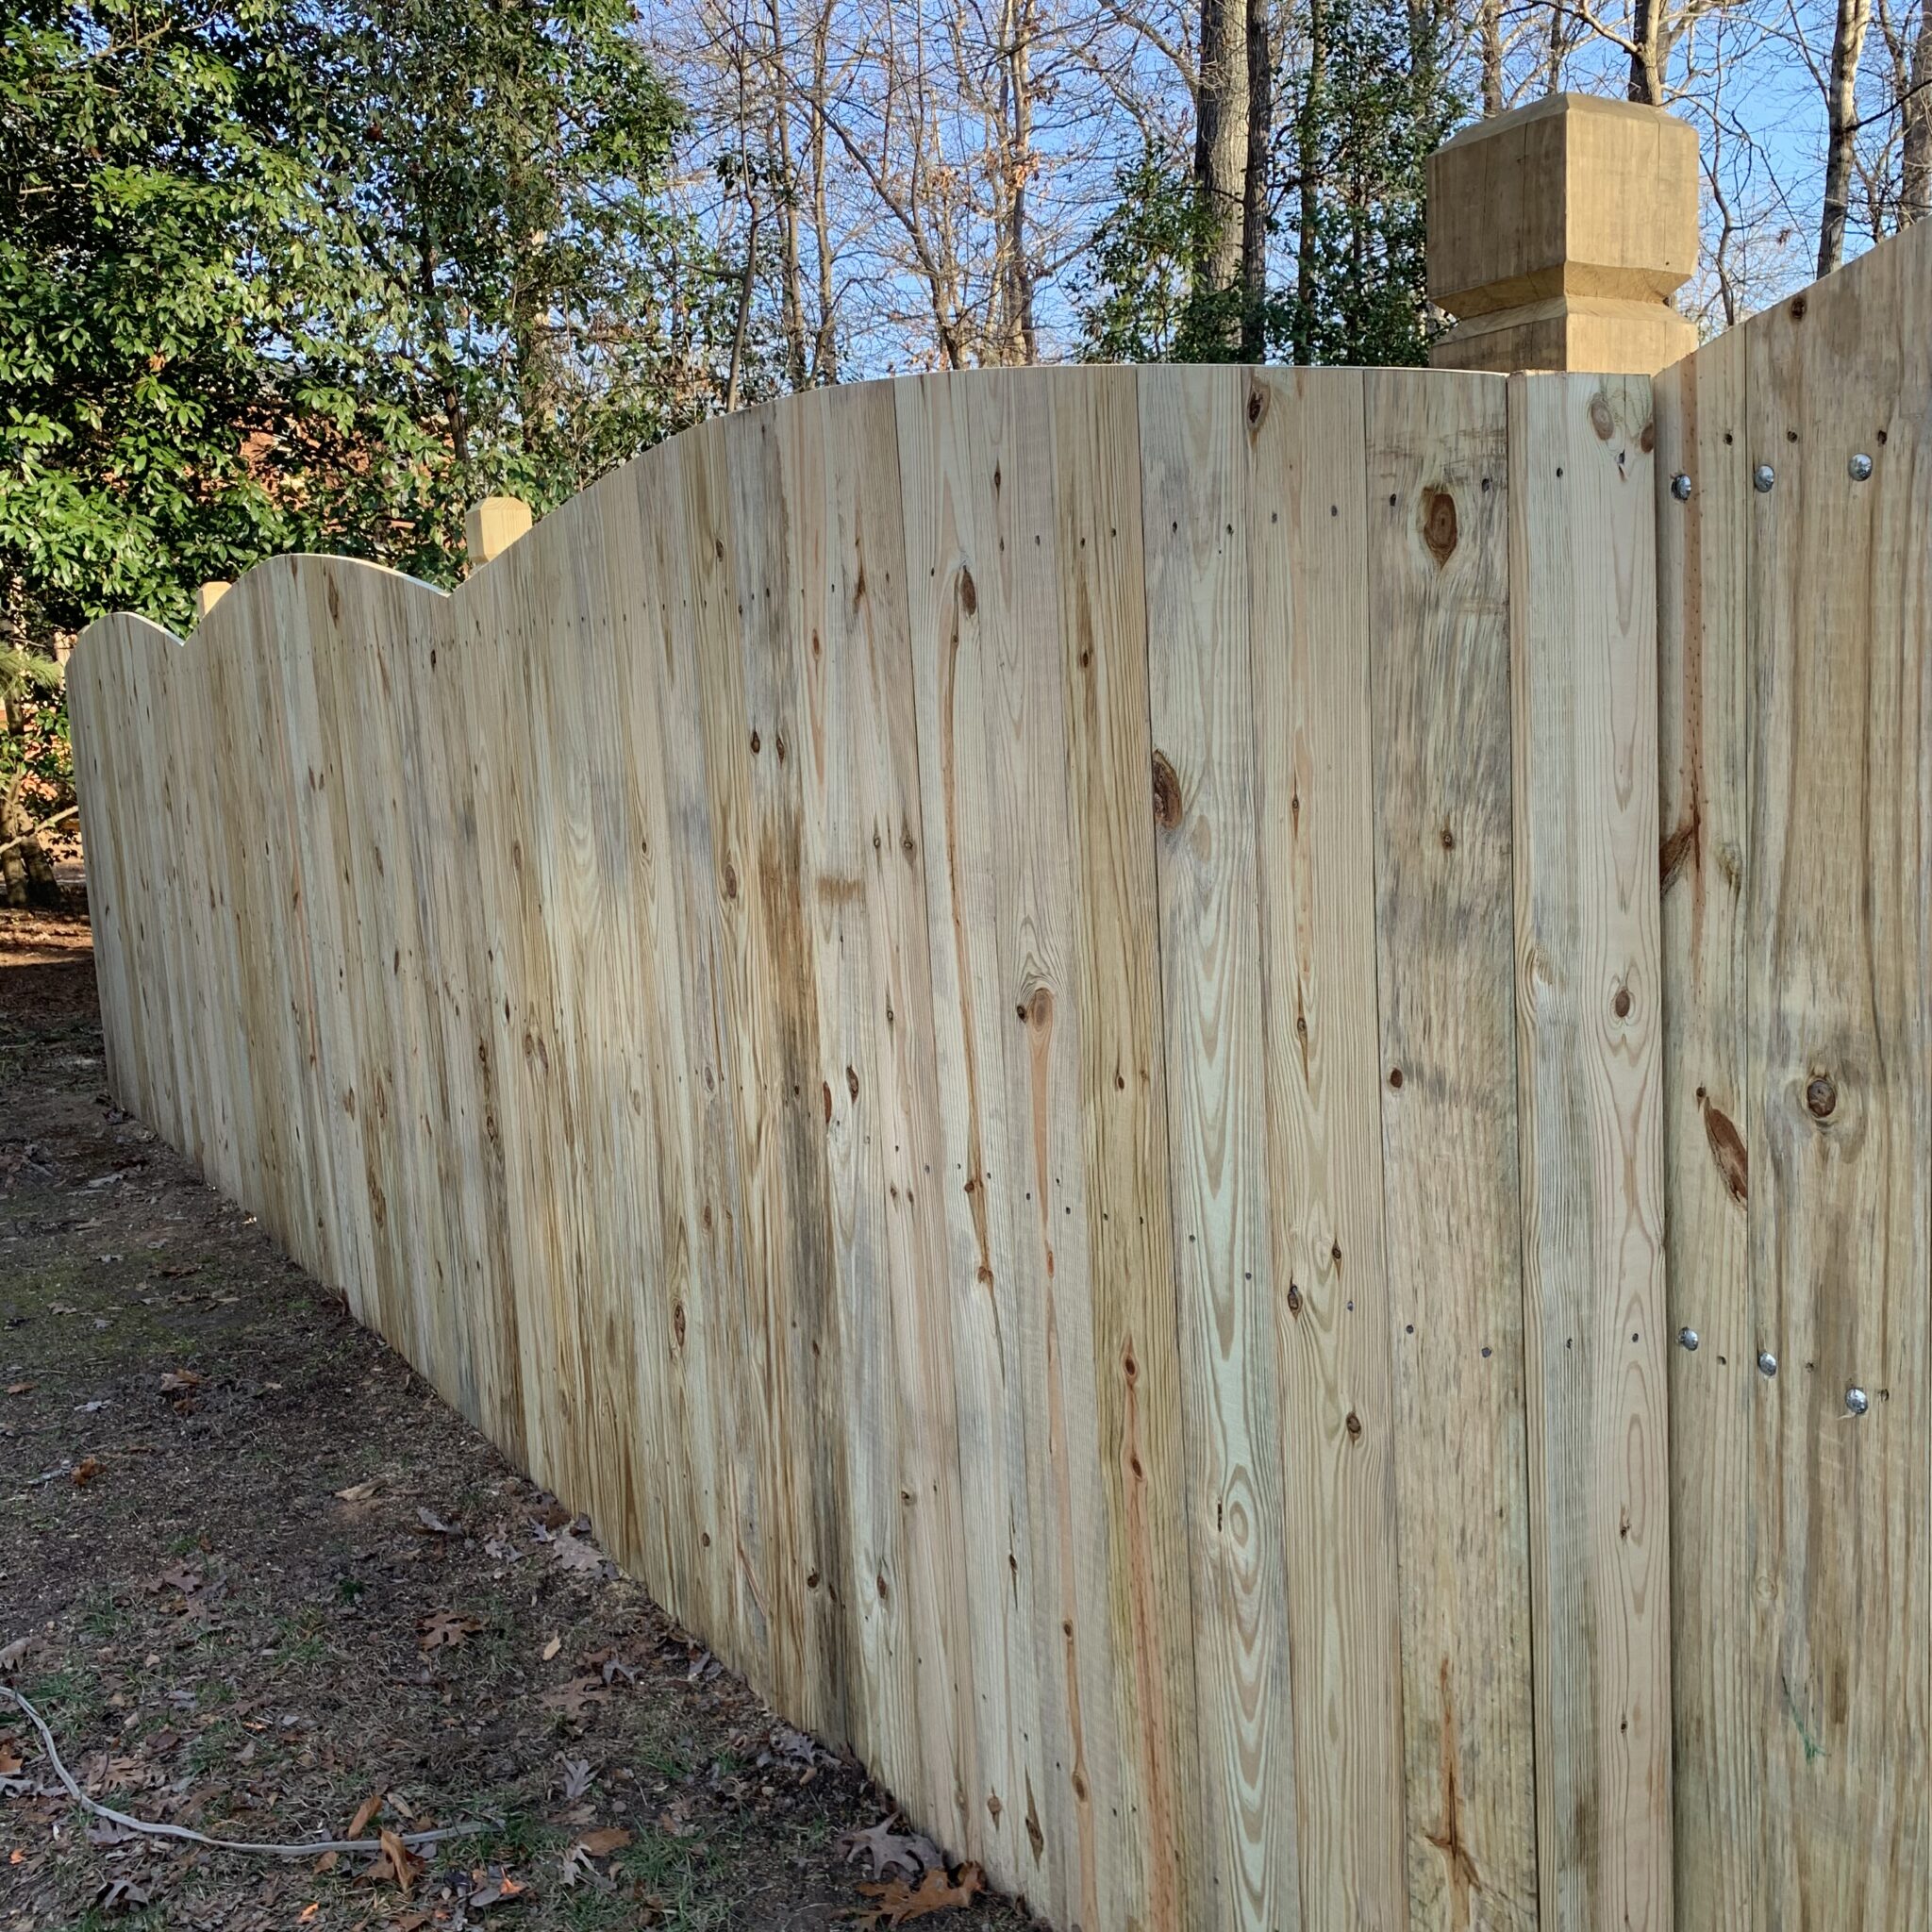 6 foot wood privacy fence with beveled and notched posts.